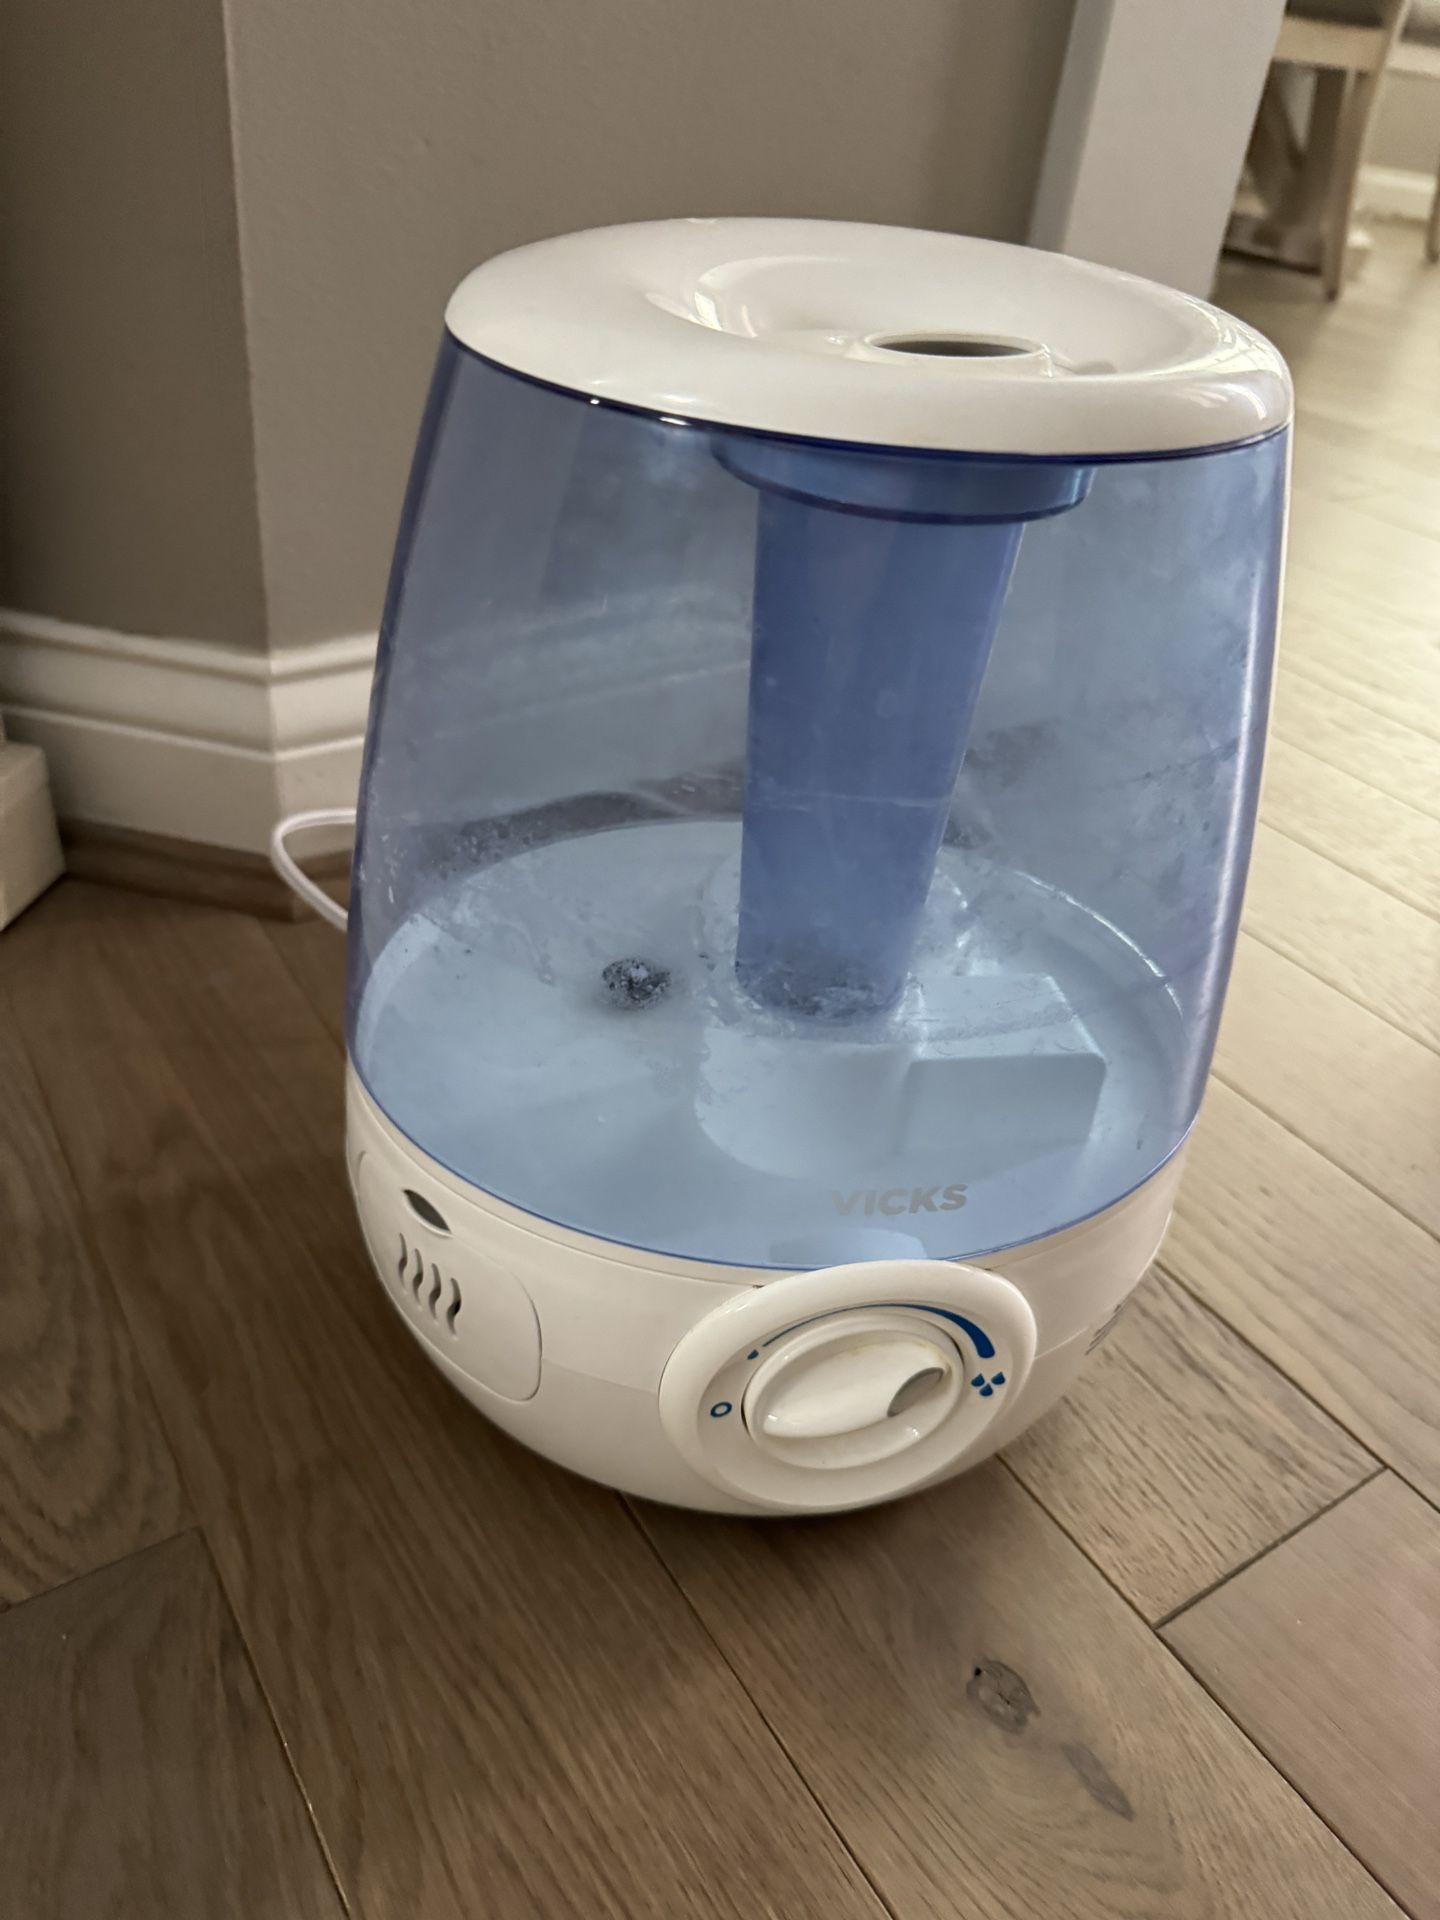 Vick’s Electric Room Humidifier in good shape!  